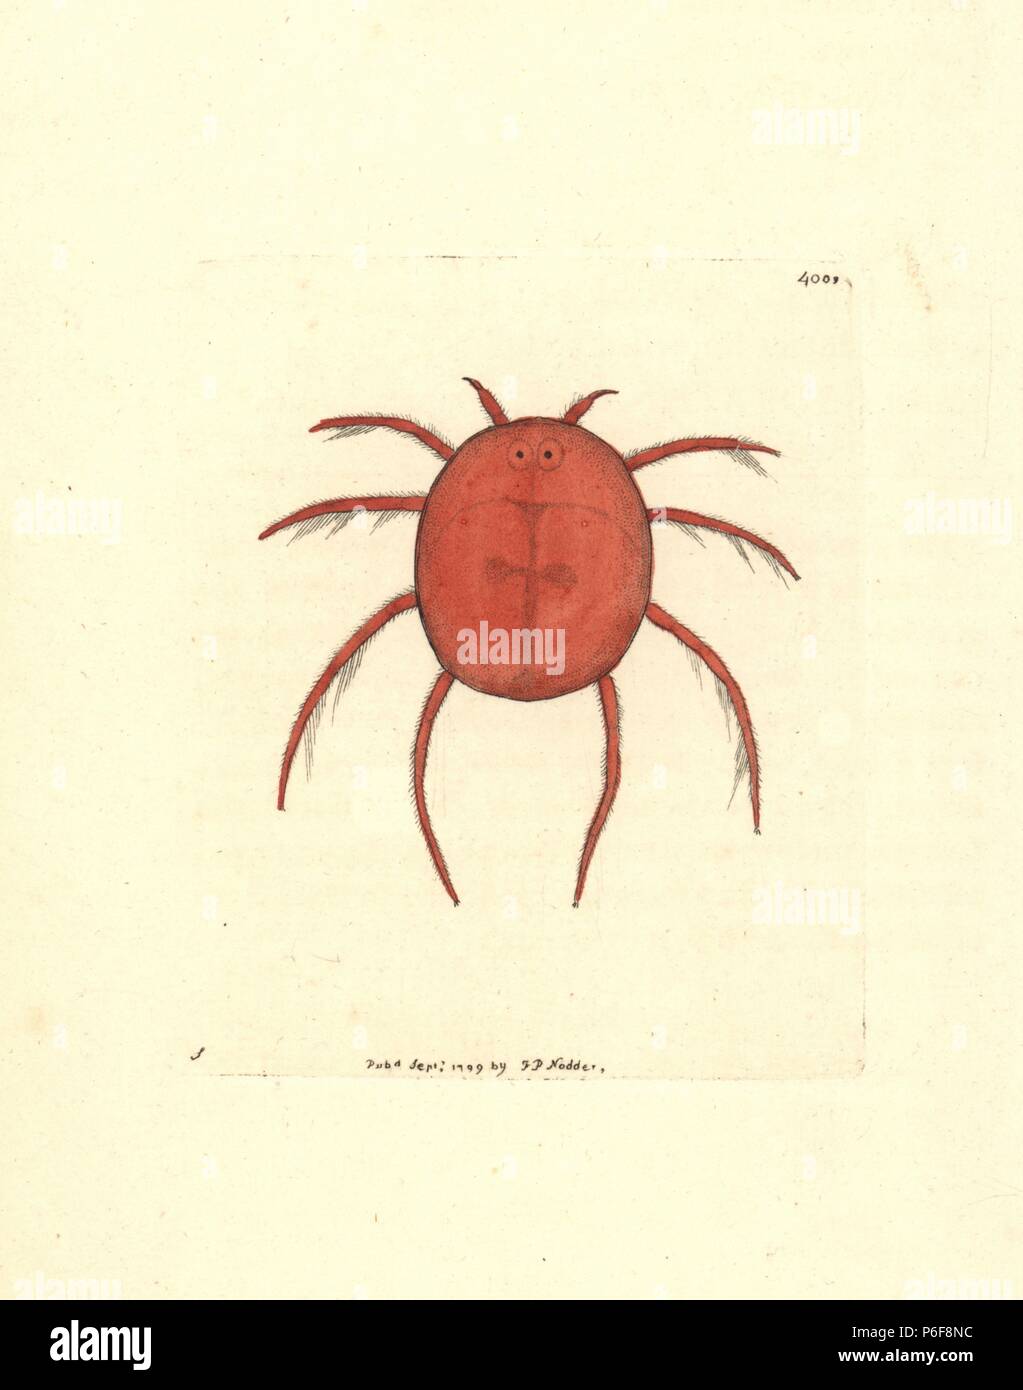 Red water spider or scarlet hydrachna, Hydrachna coccinea. Illustration by George Shaw. Handcoloured copperplate engraving from George Shaw and Frederick Nodder's 'The Naturalist's Miscellany,' London, 1799. Stock Photo